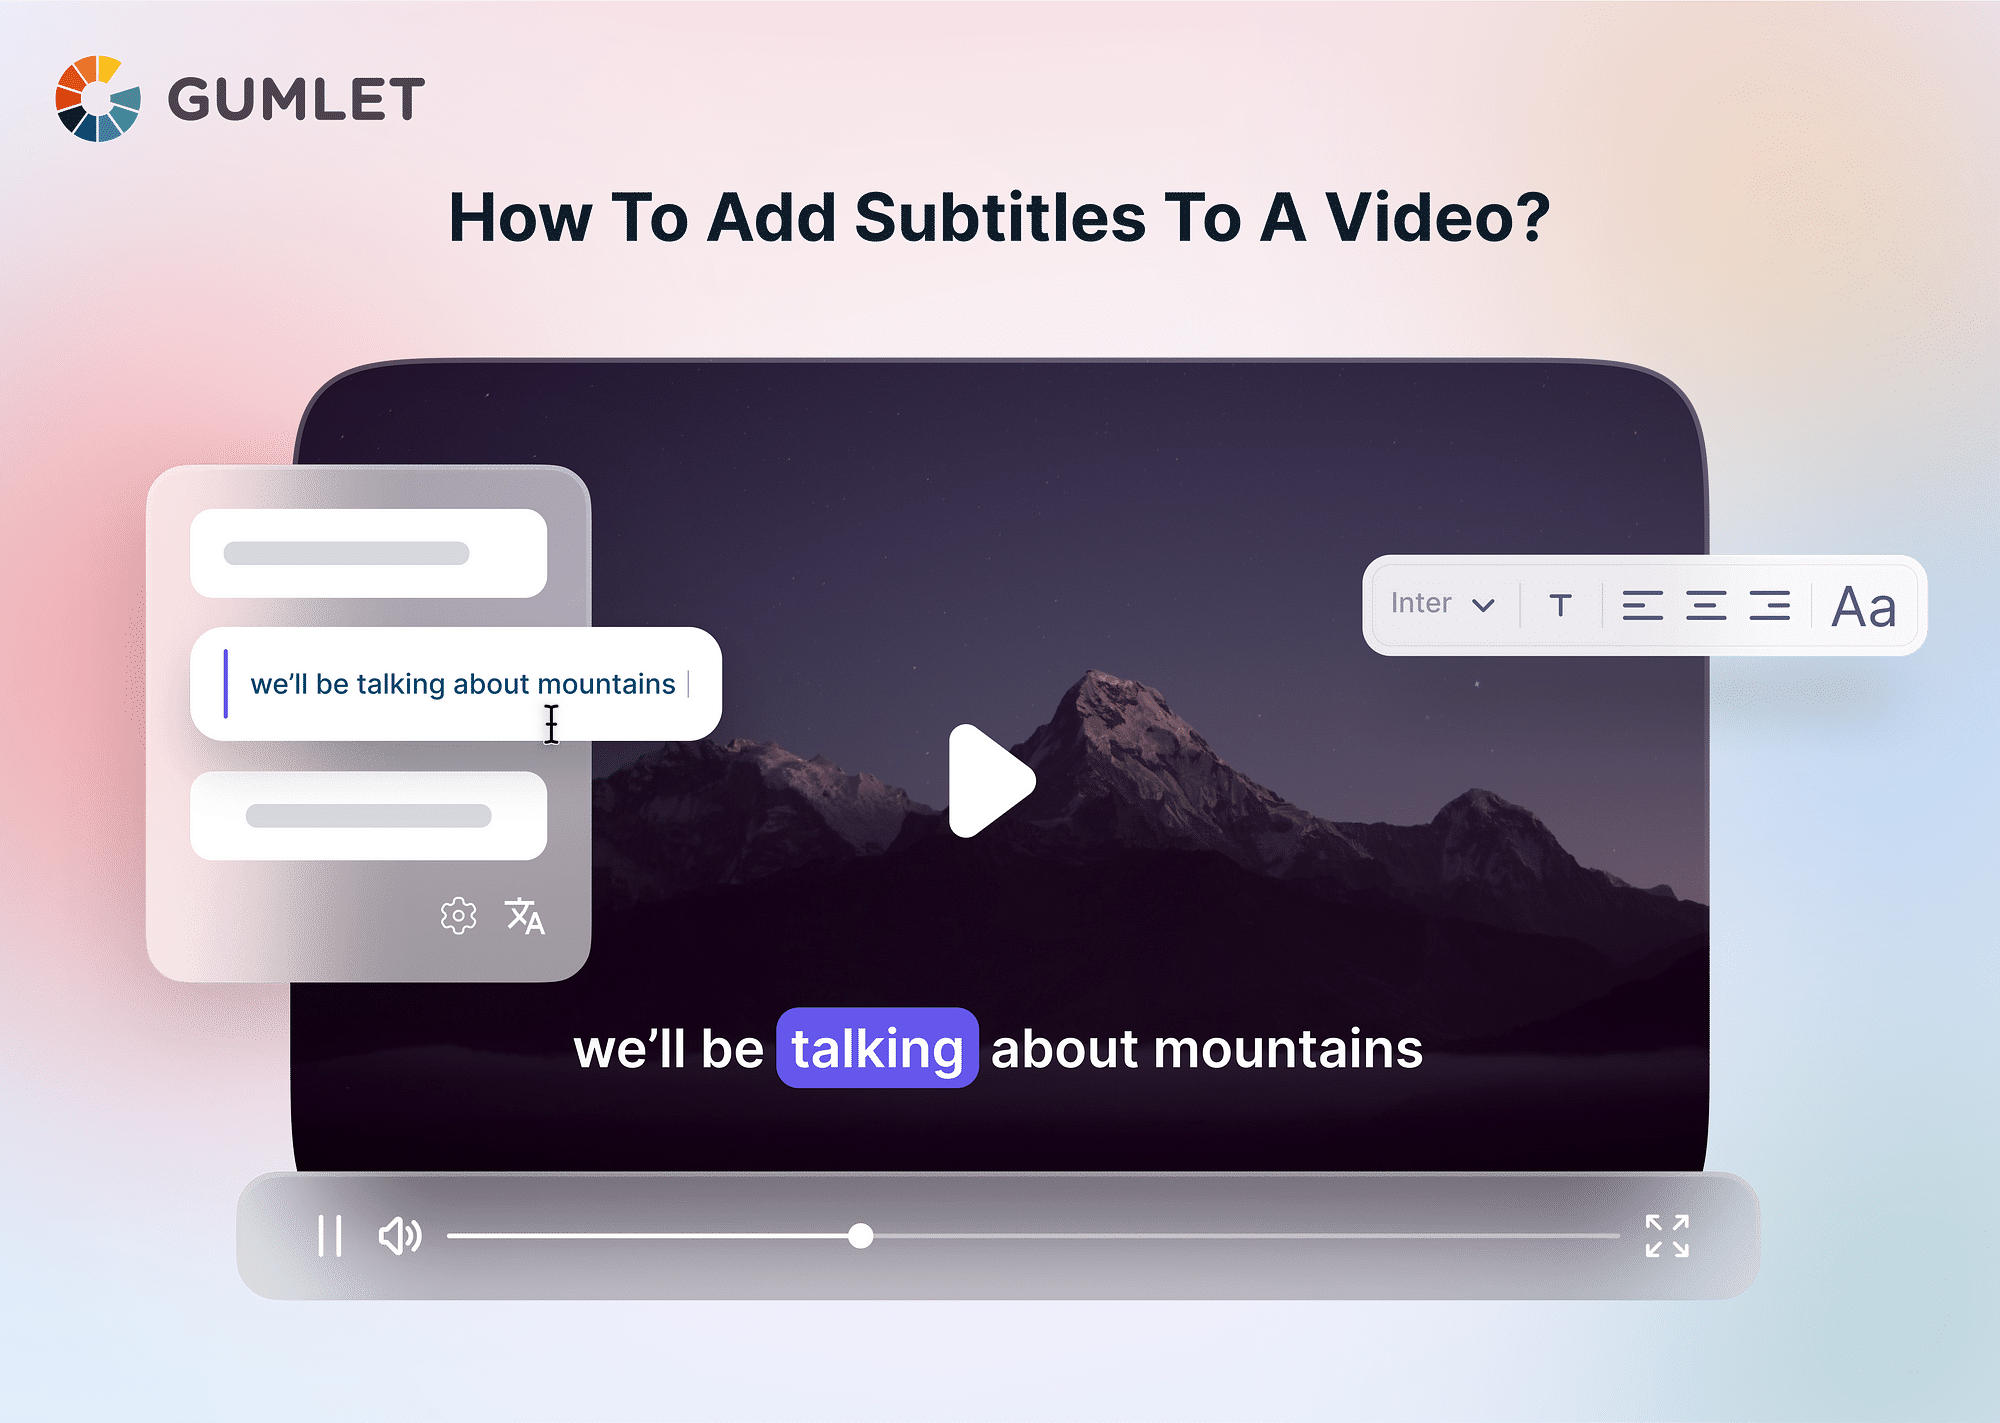 How to Add Subtitles to a Video?